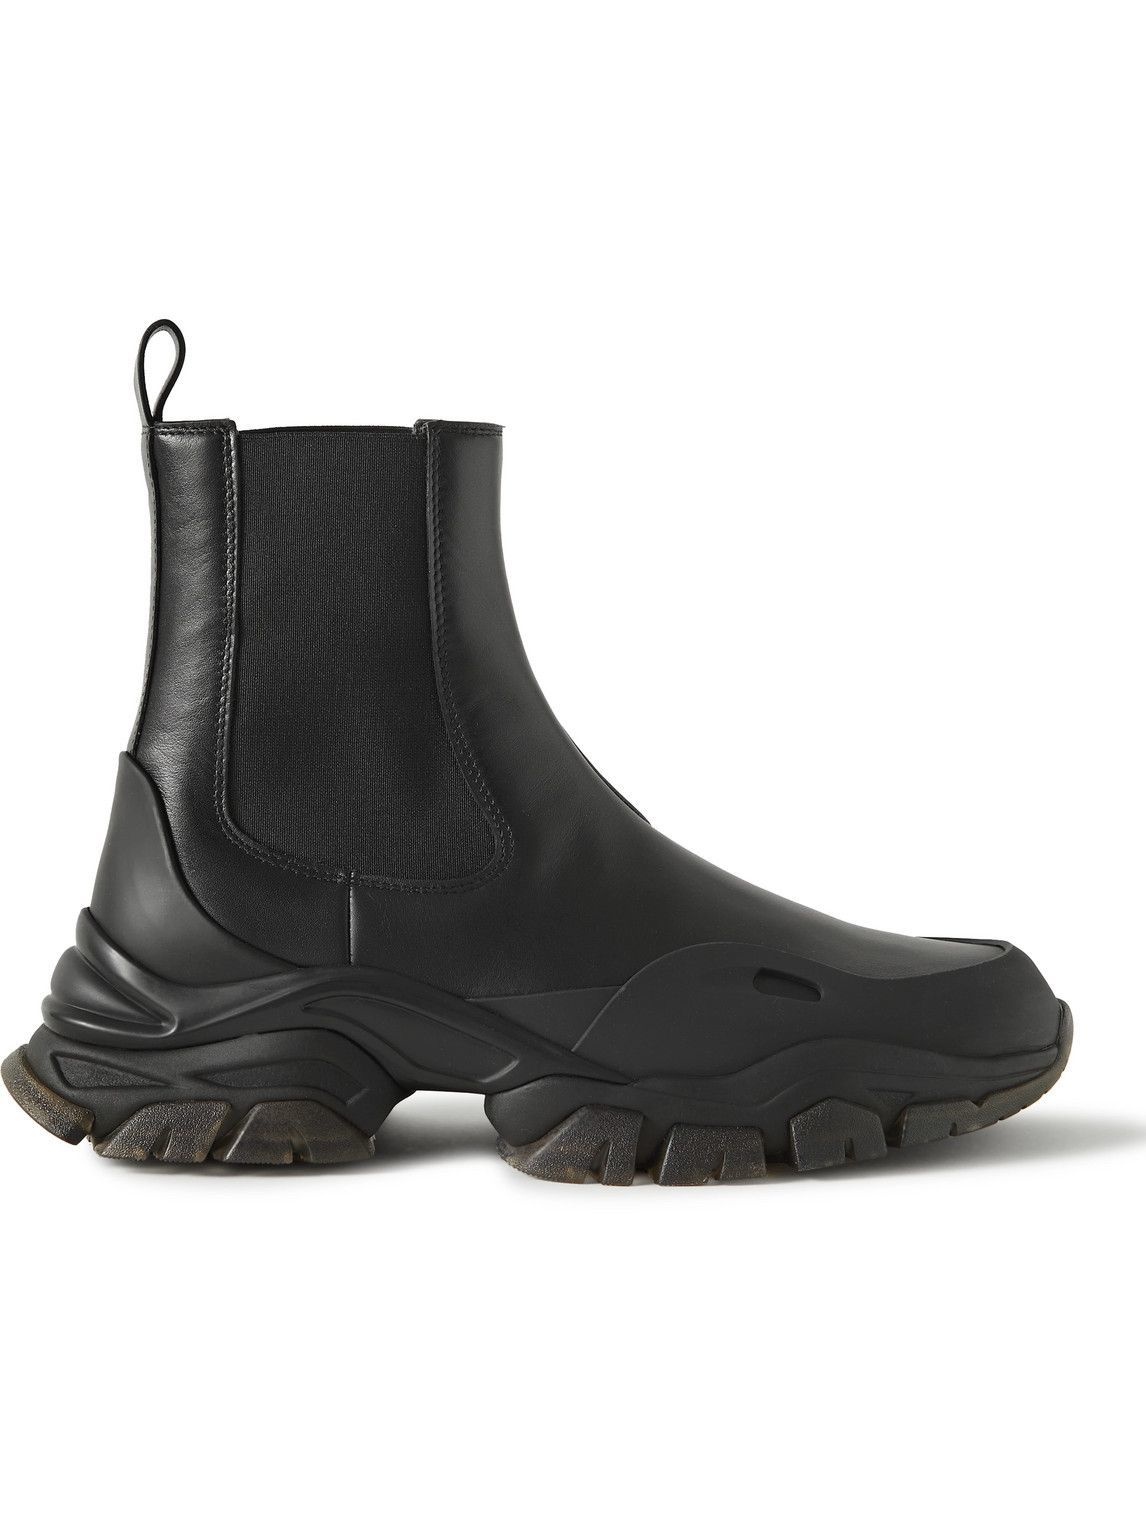 Photo: Moncler Genius - 6 Moncler 1017 ALYX 9SM Ary Rubber-Trimmed Leather Chelsea Boots - Black